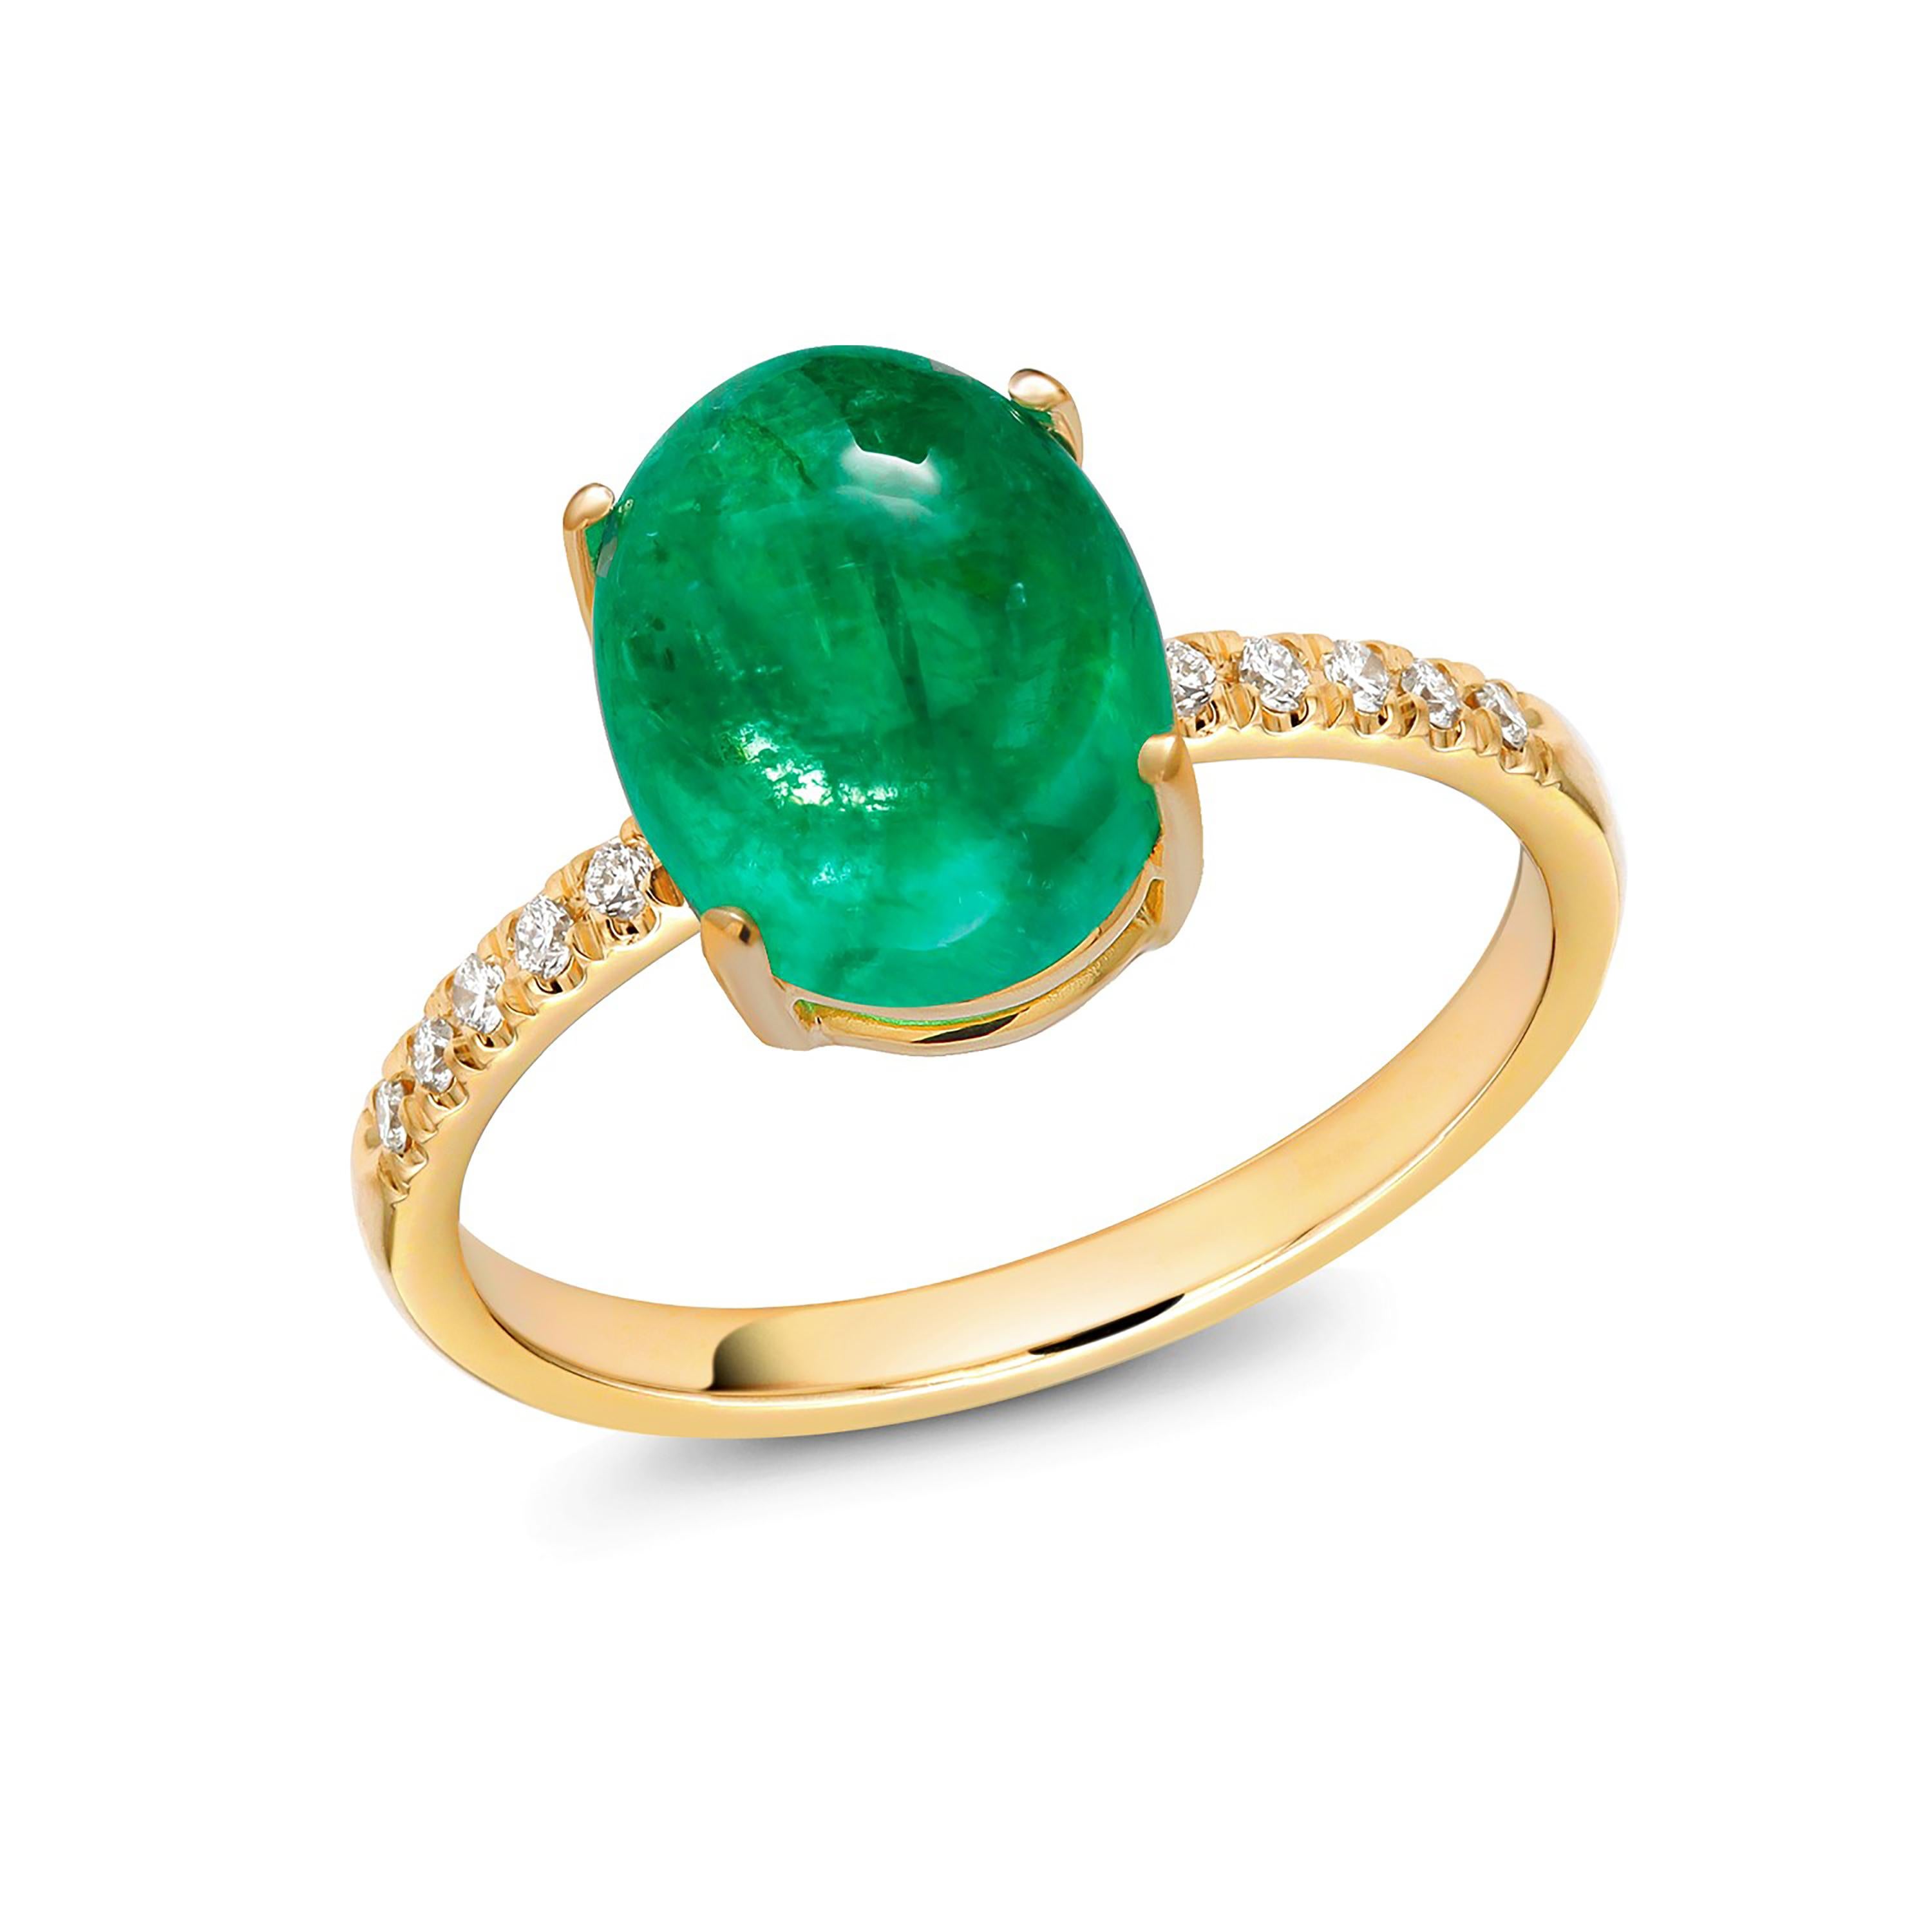 Contemporary Cabochon Emerald and Diamonds Yellow Gold Cocktail Ring Weighing 7.05 Carat